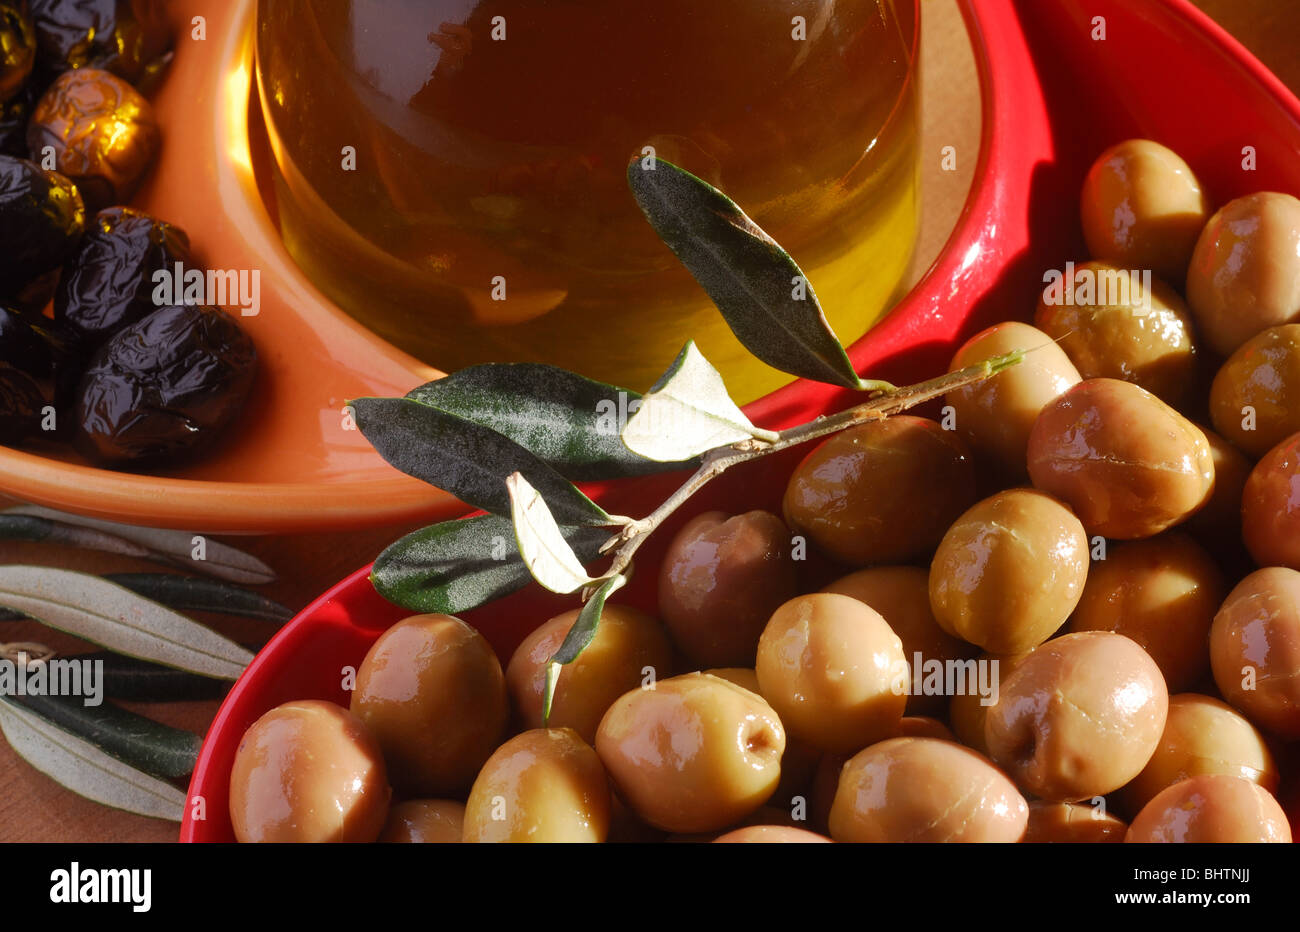 green and black olives with olive oil Stock Photo